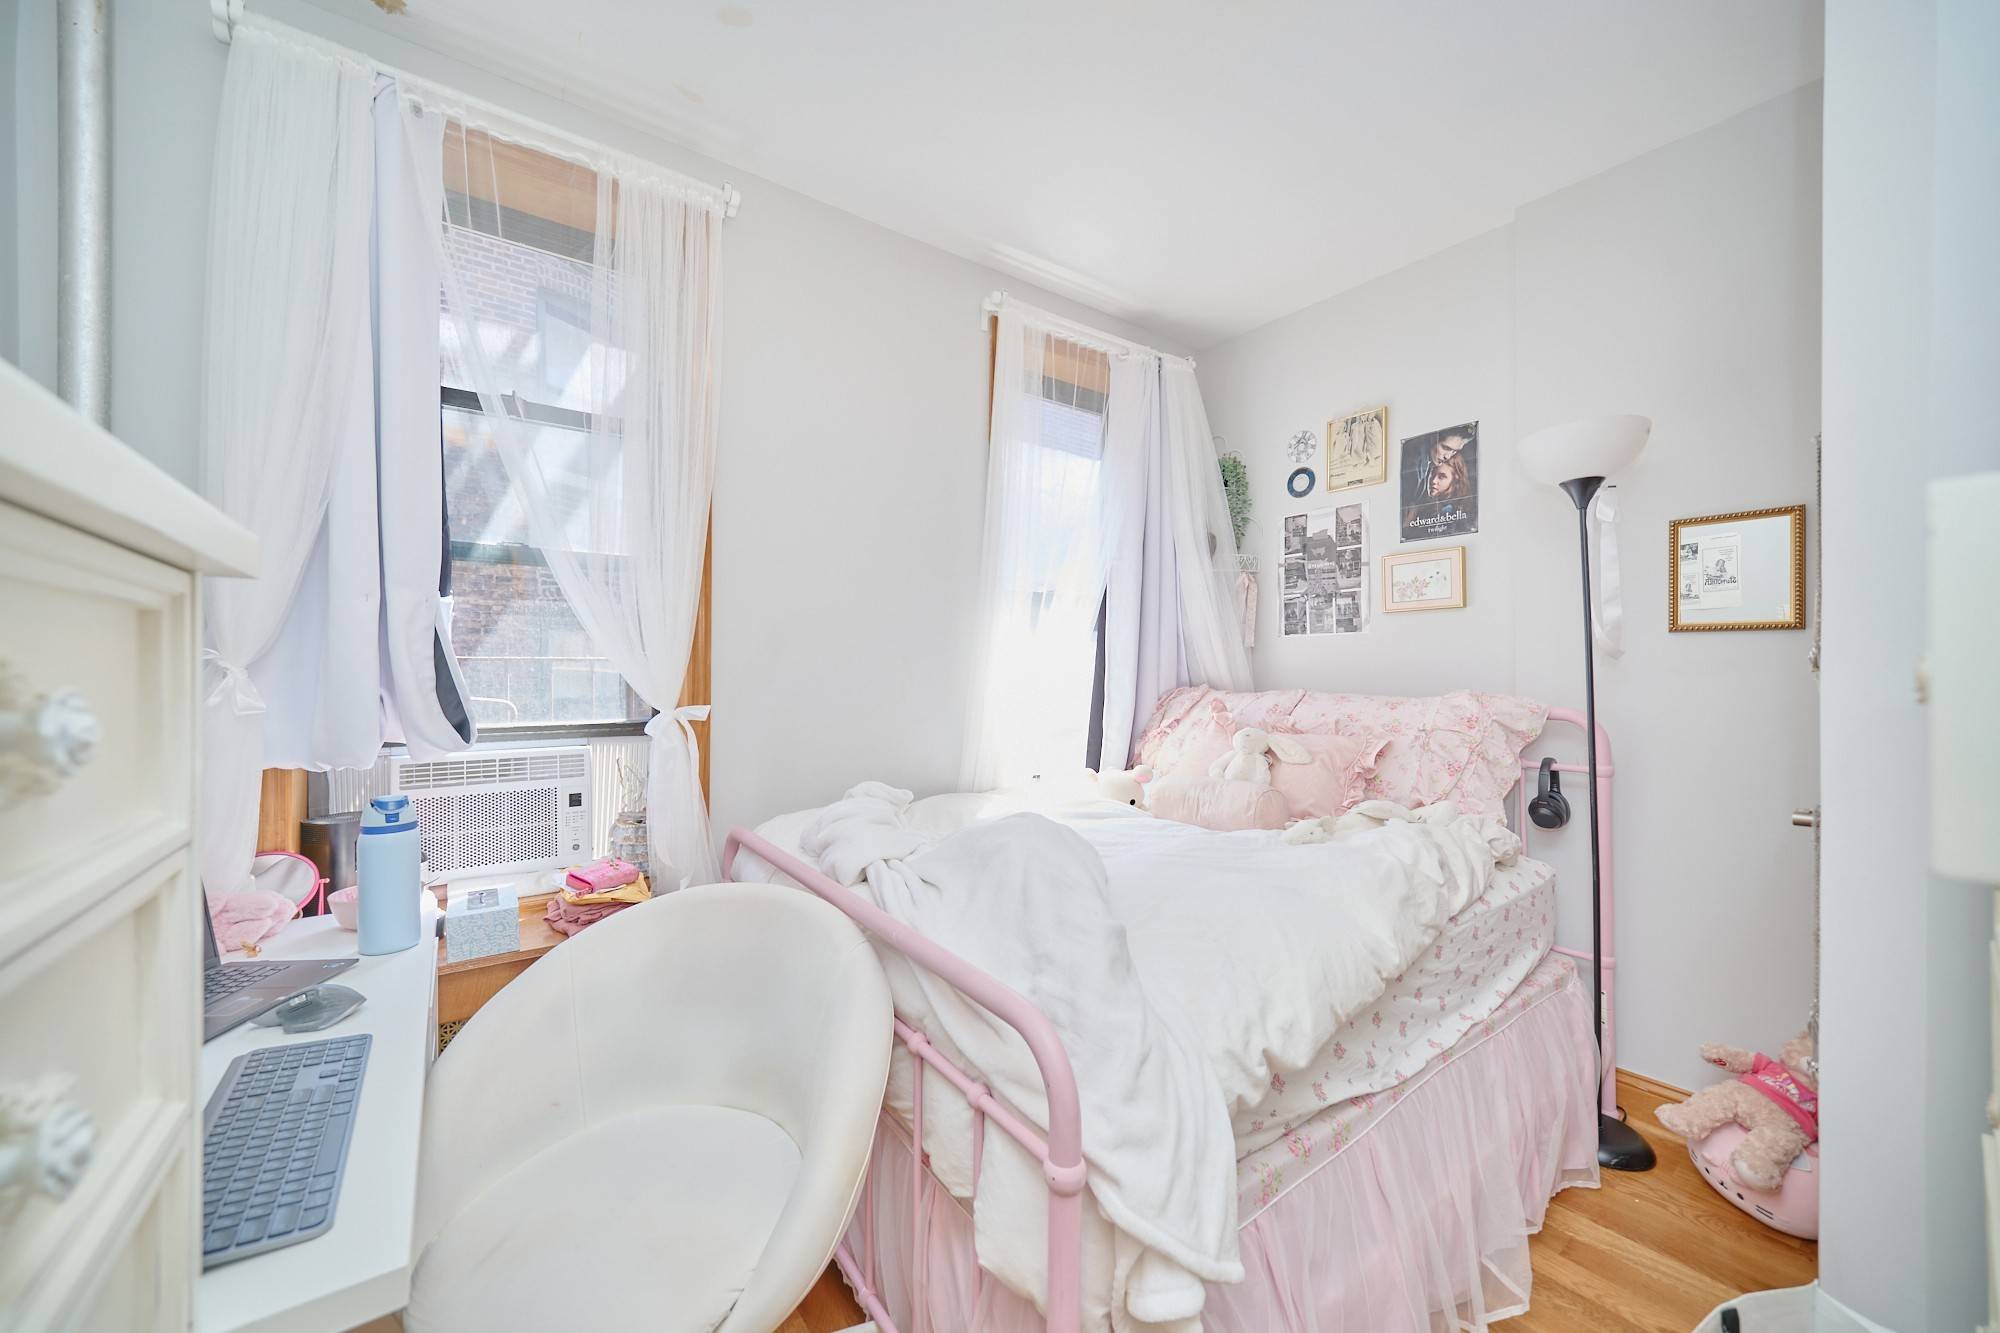 APARTMENT FEATURES Queen sized bedroomsDishwasherWindowed kitchenBreakfast barGranite kitchenFrench doorsCherry Wood CabinetsBright amp ; SunnyBUILDING FEATURESPets allowedLive in SuperLaundry next door to building, Close to the Highline, Bryant Park, Mad